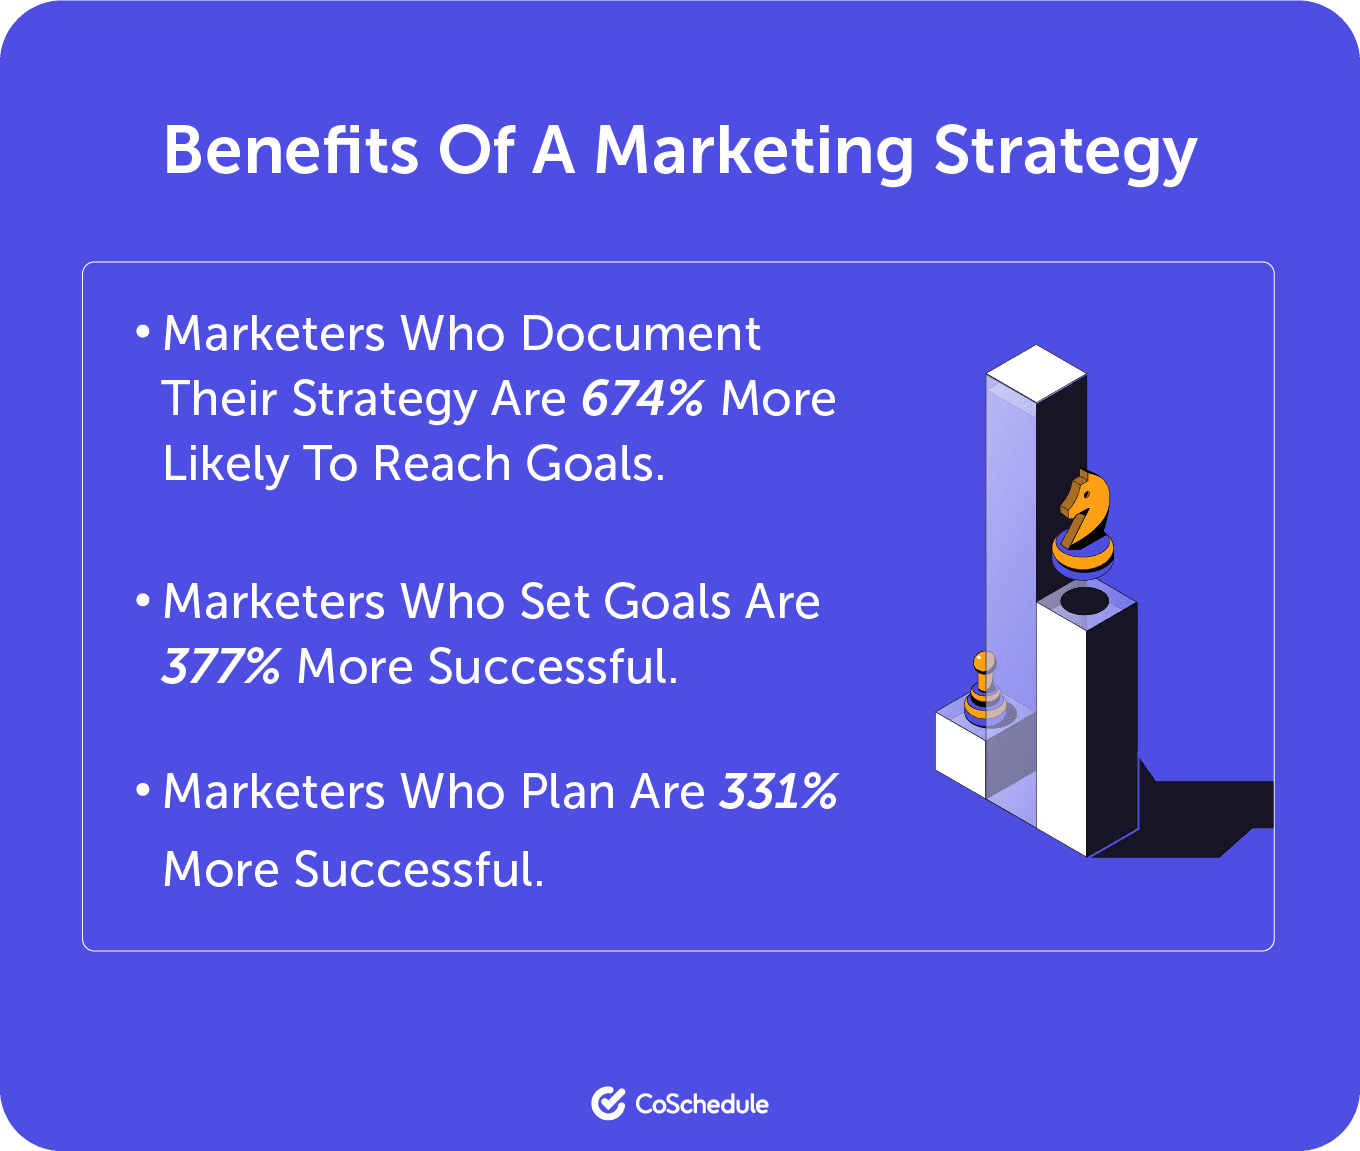 Benefits of marketing strategy graphic 